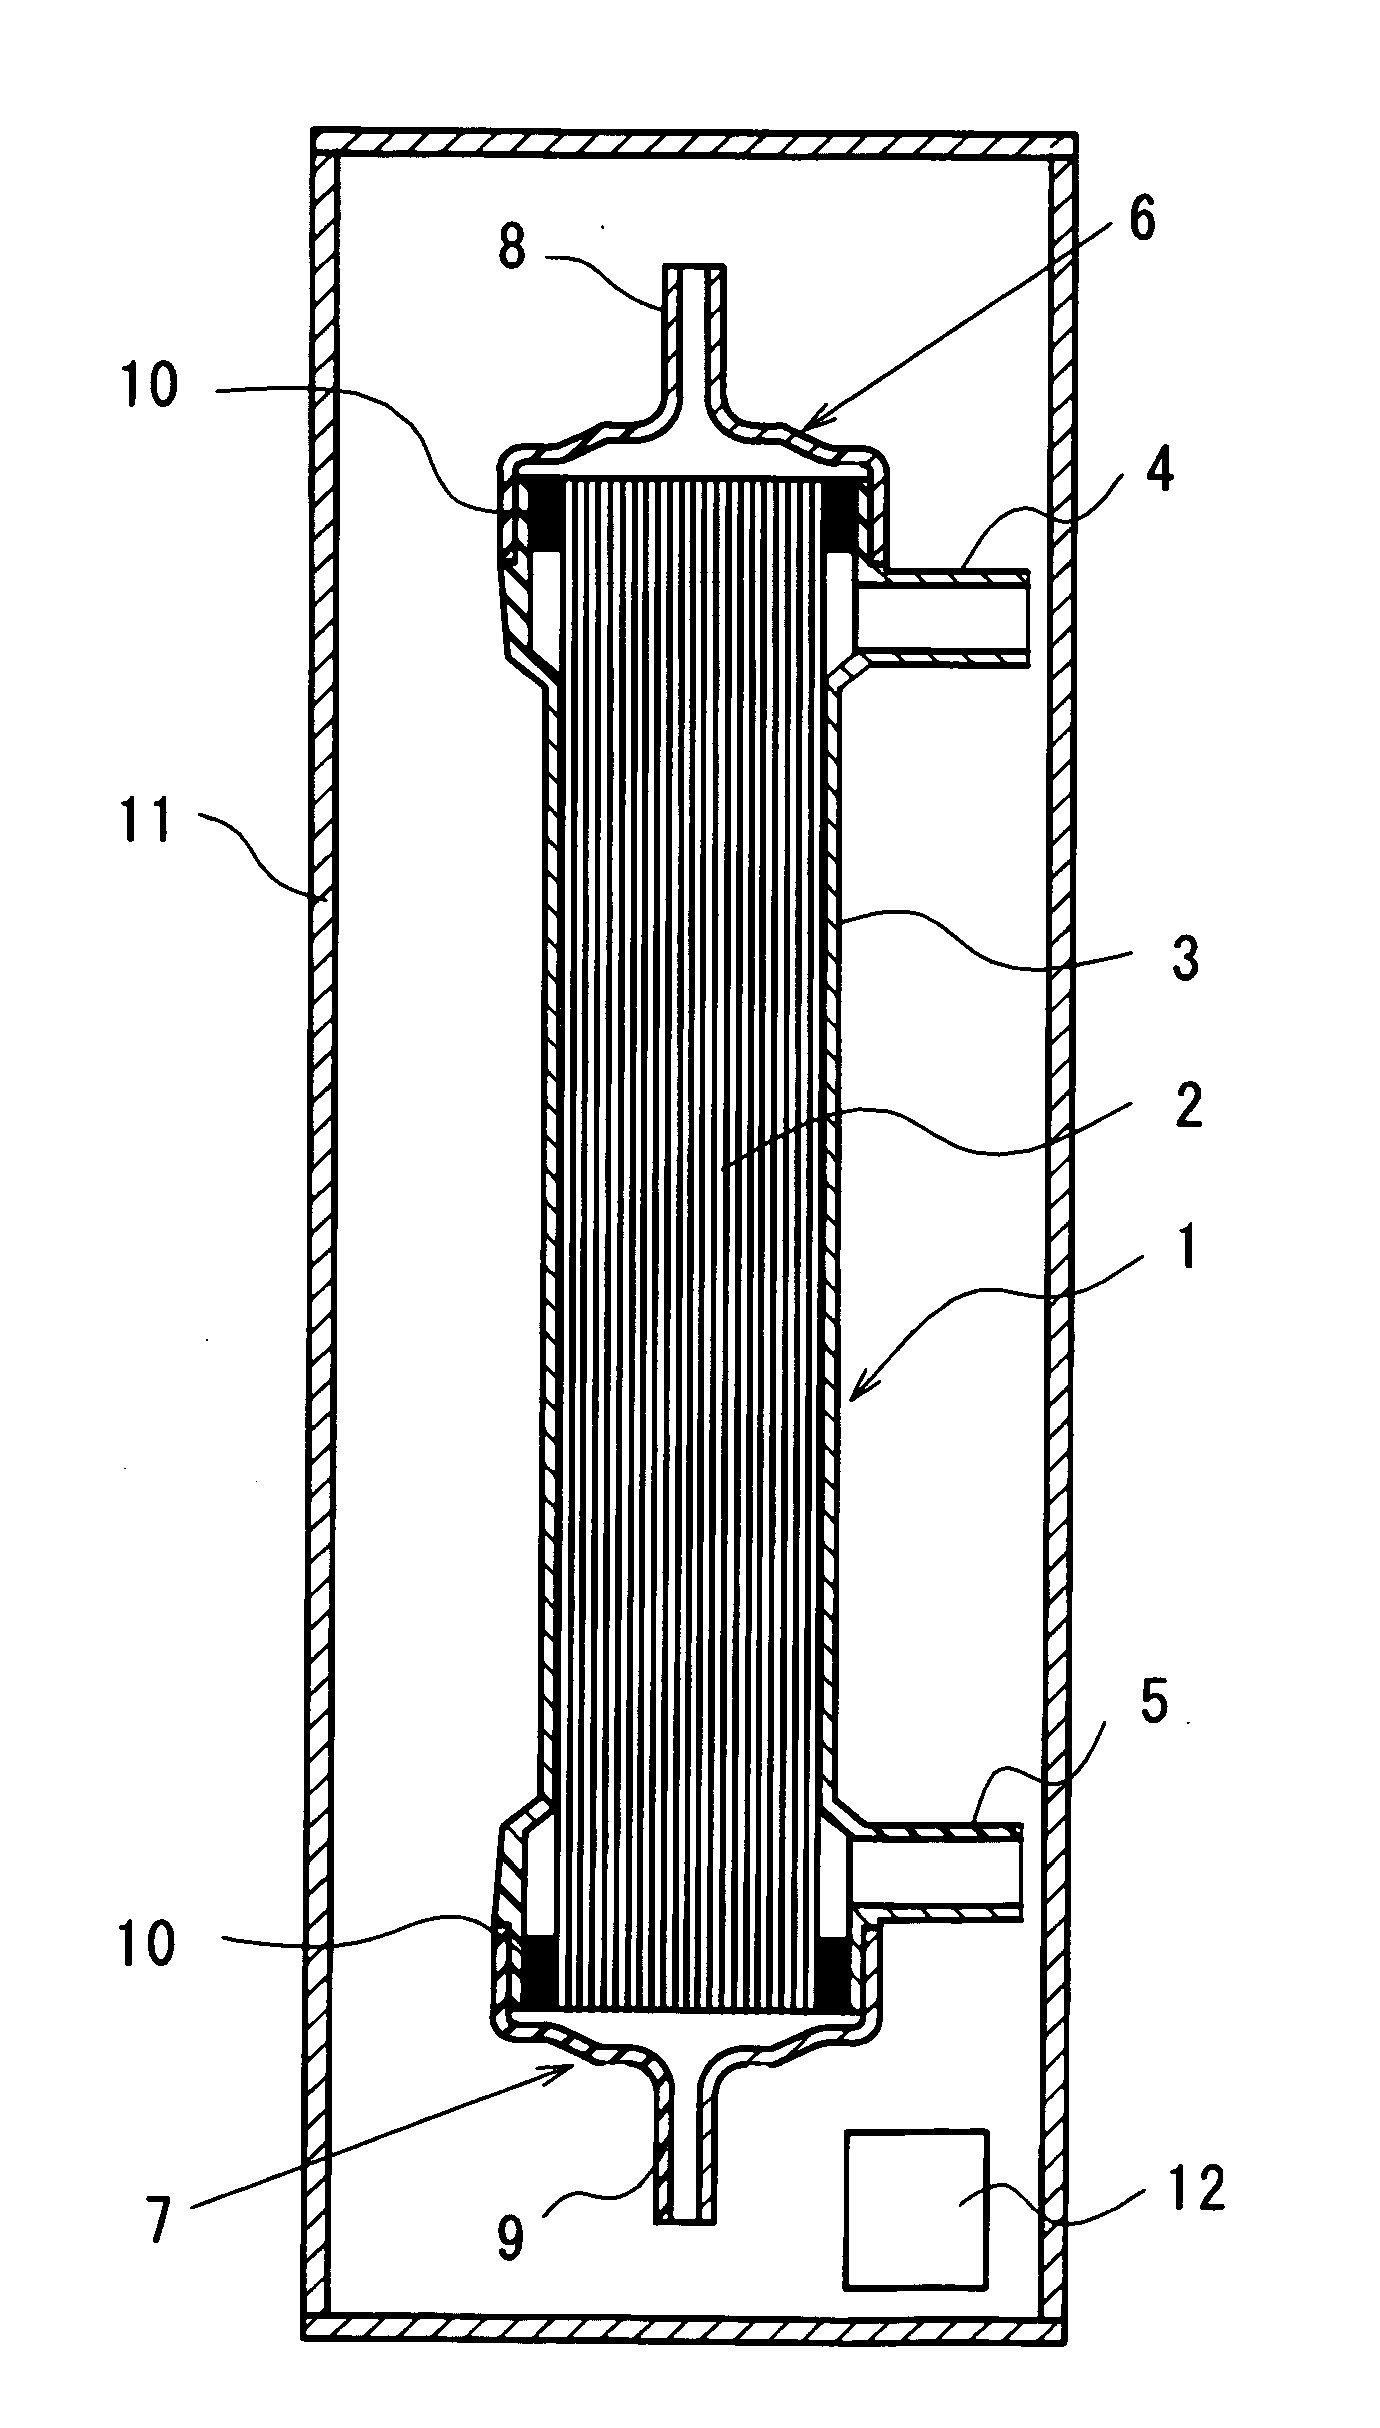 Hollow fiber blood-processing device and method for packaging and sterilizing such devices